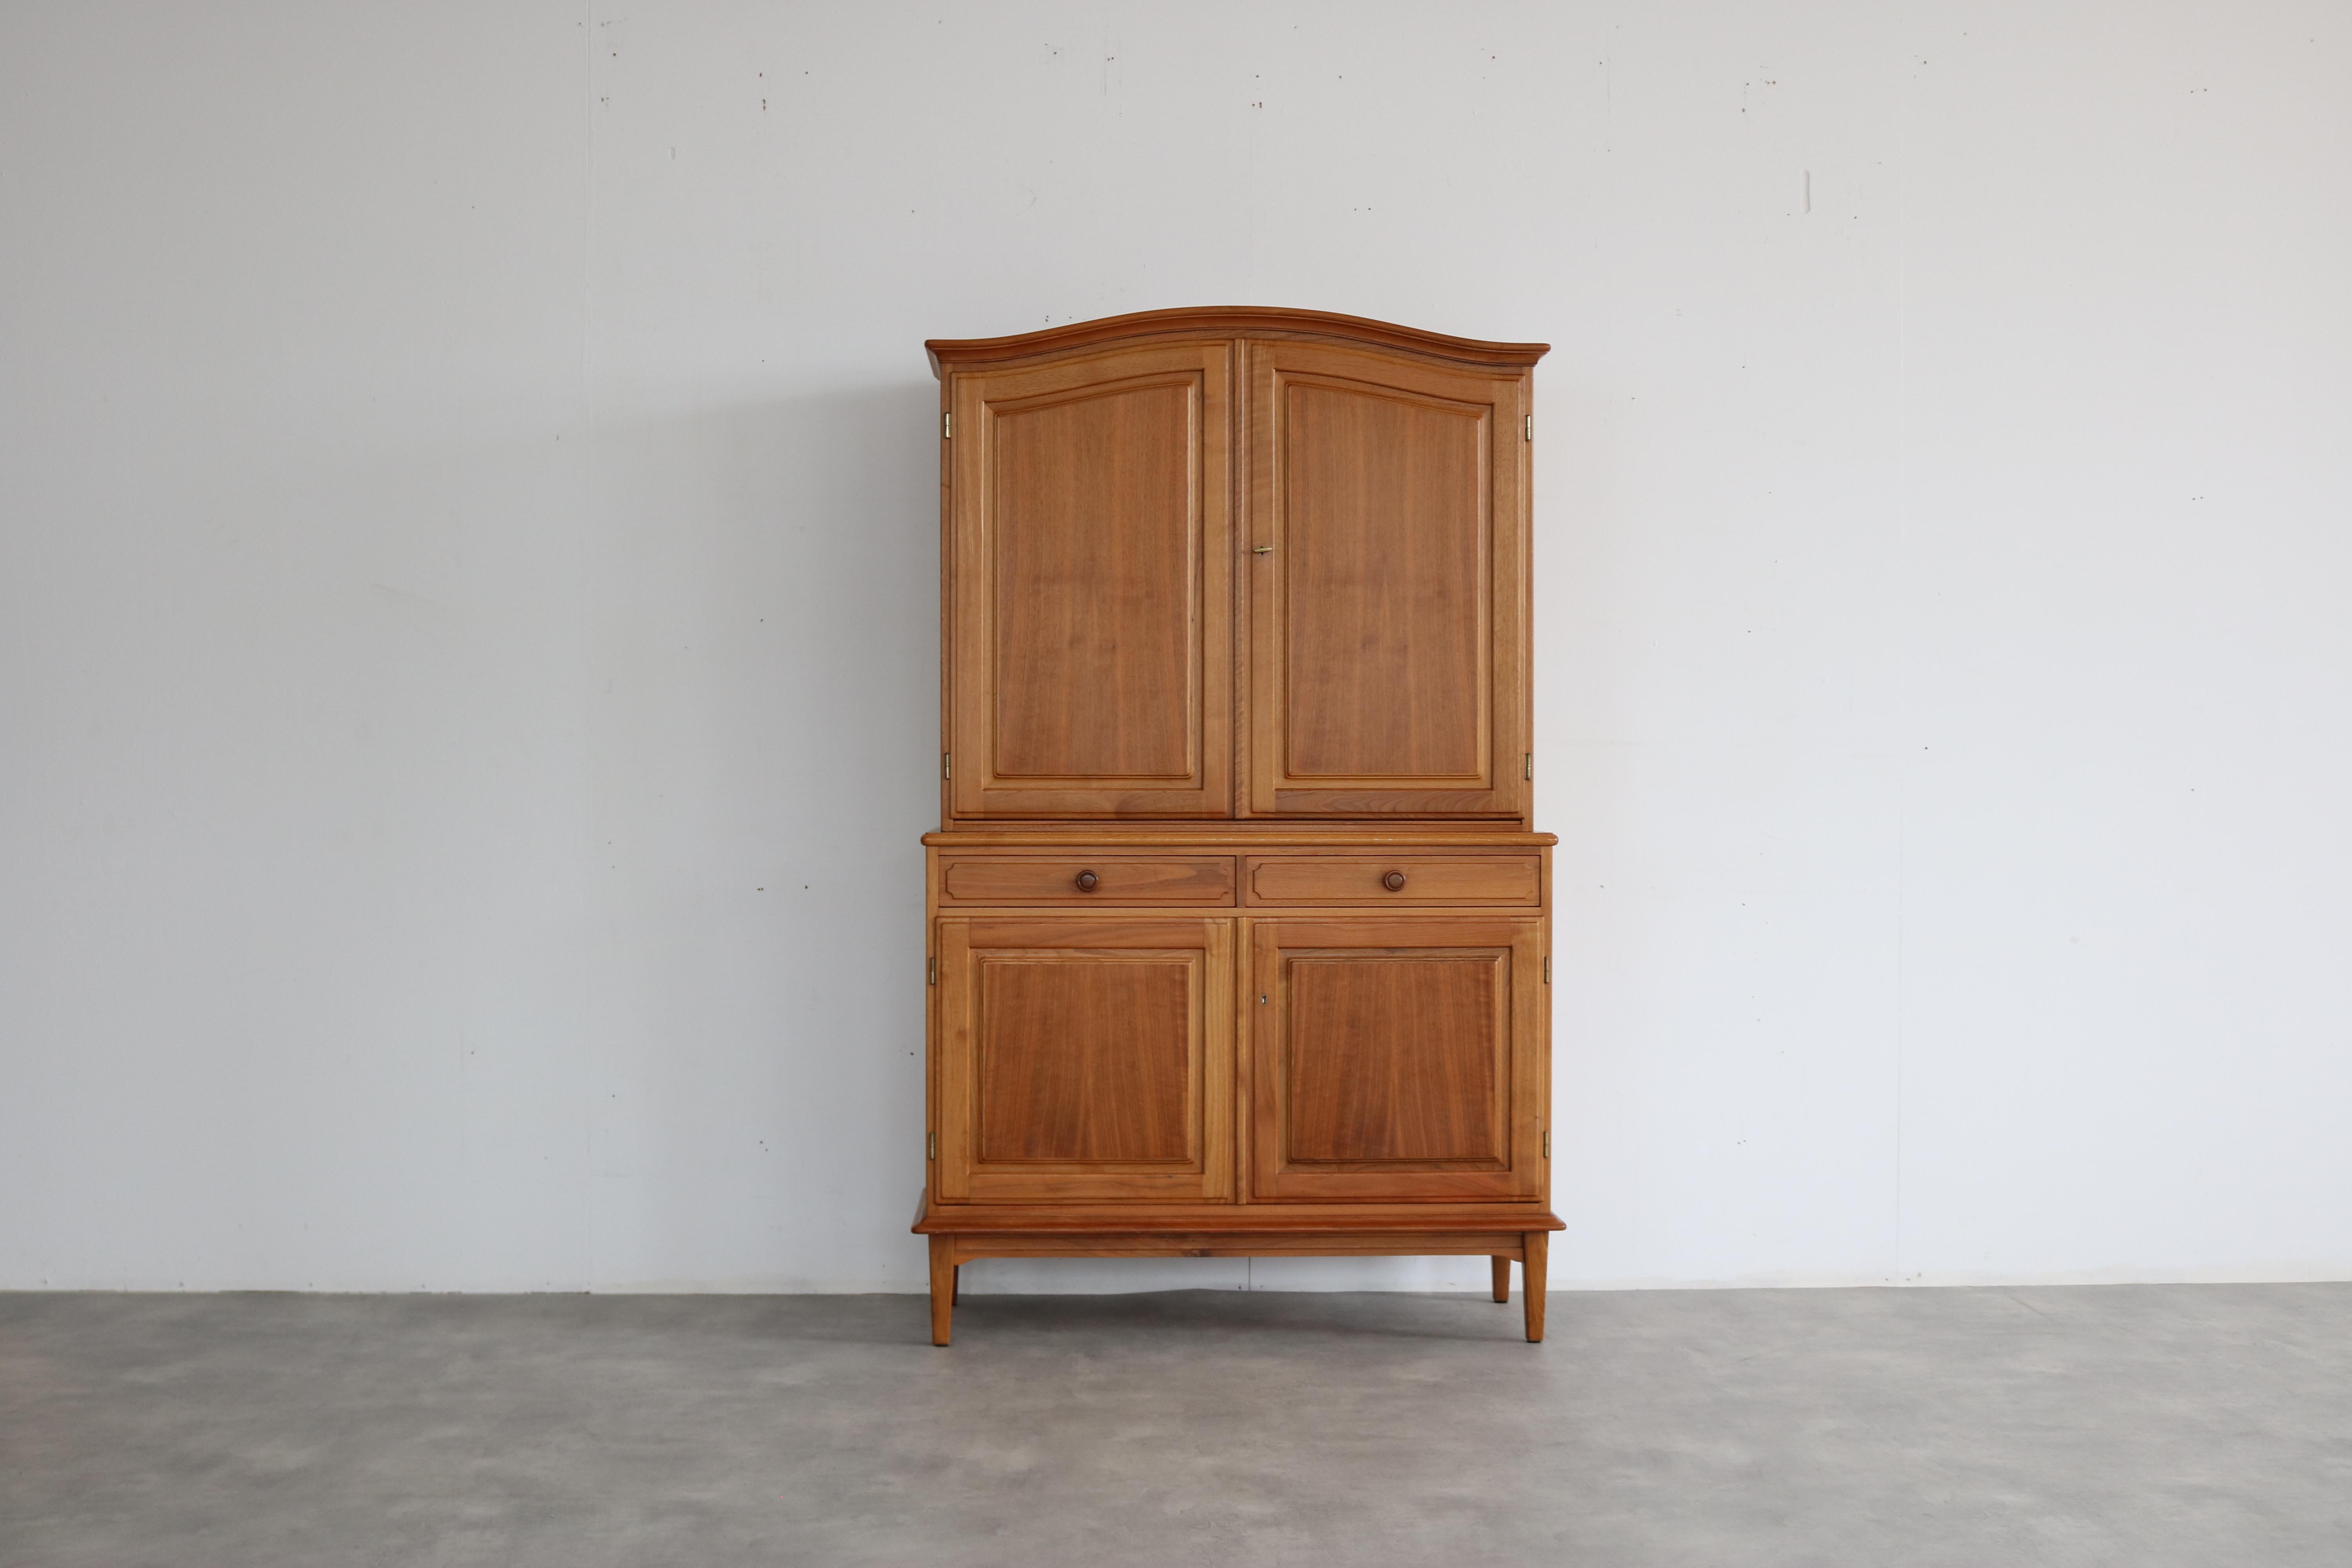 
vintage sideboard | wall cupboard | 60s | Swedish

period | 60's
design | unknown | Sweden
condition | good | light signs of use
size | 173 x 105 x 43 (hxwxd)

details | teak;

article number | 2125